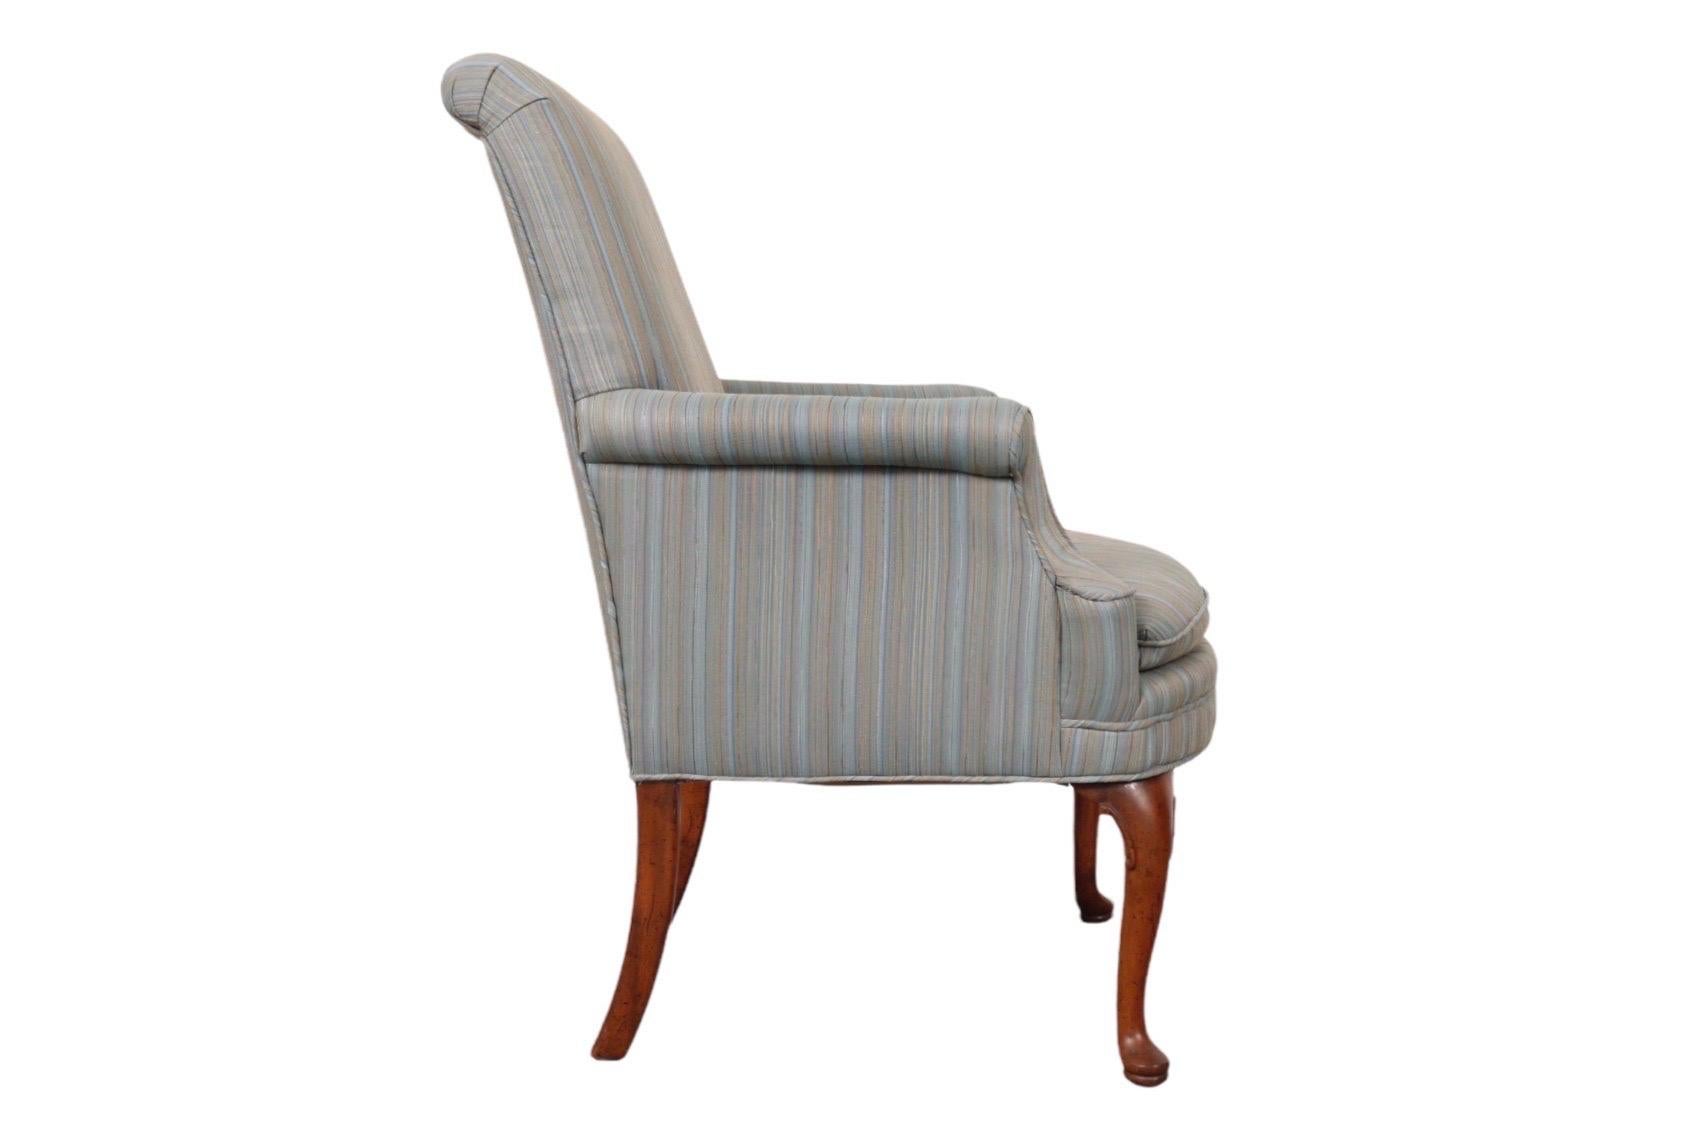 Queen Anne Upholstered Arm Chair In Good Condition For Sale In Bradenton, FL